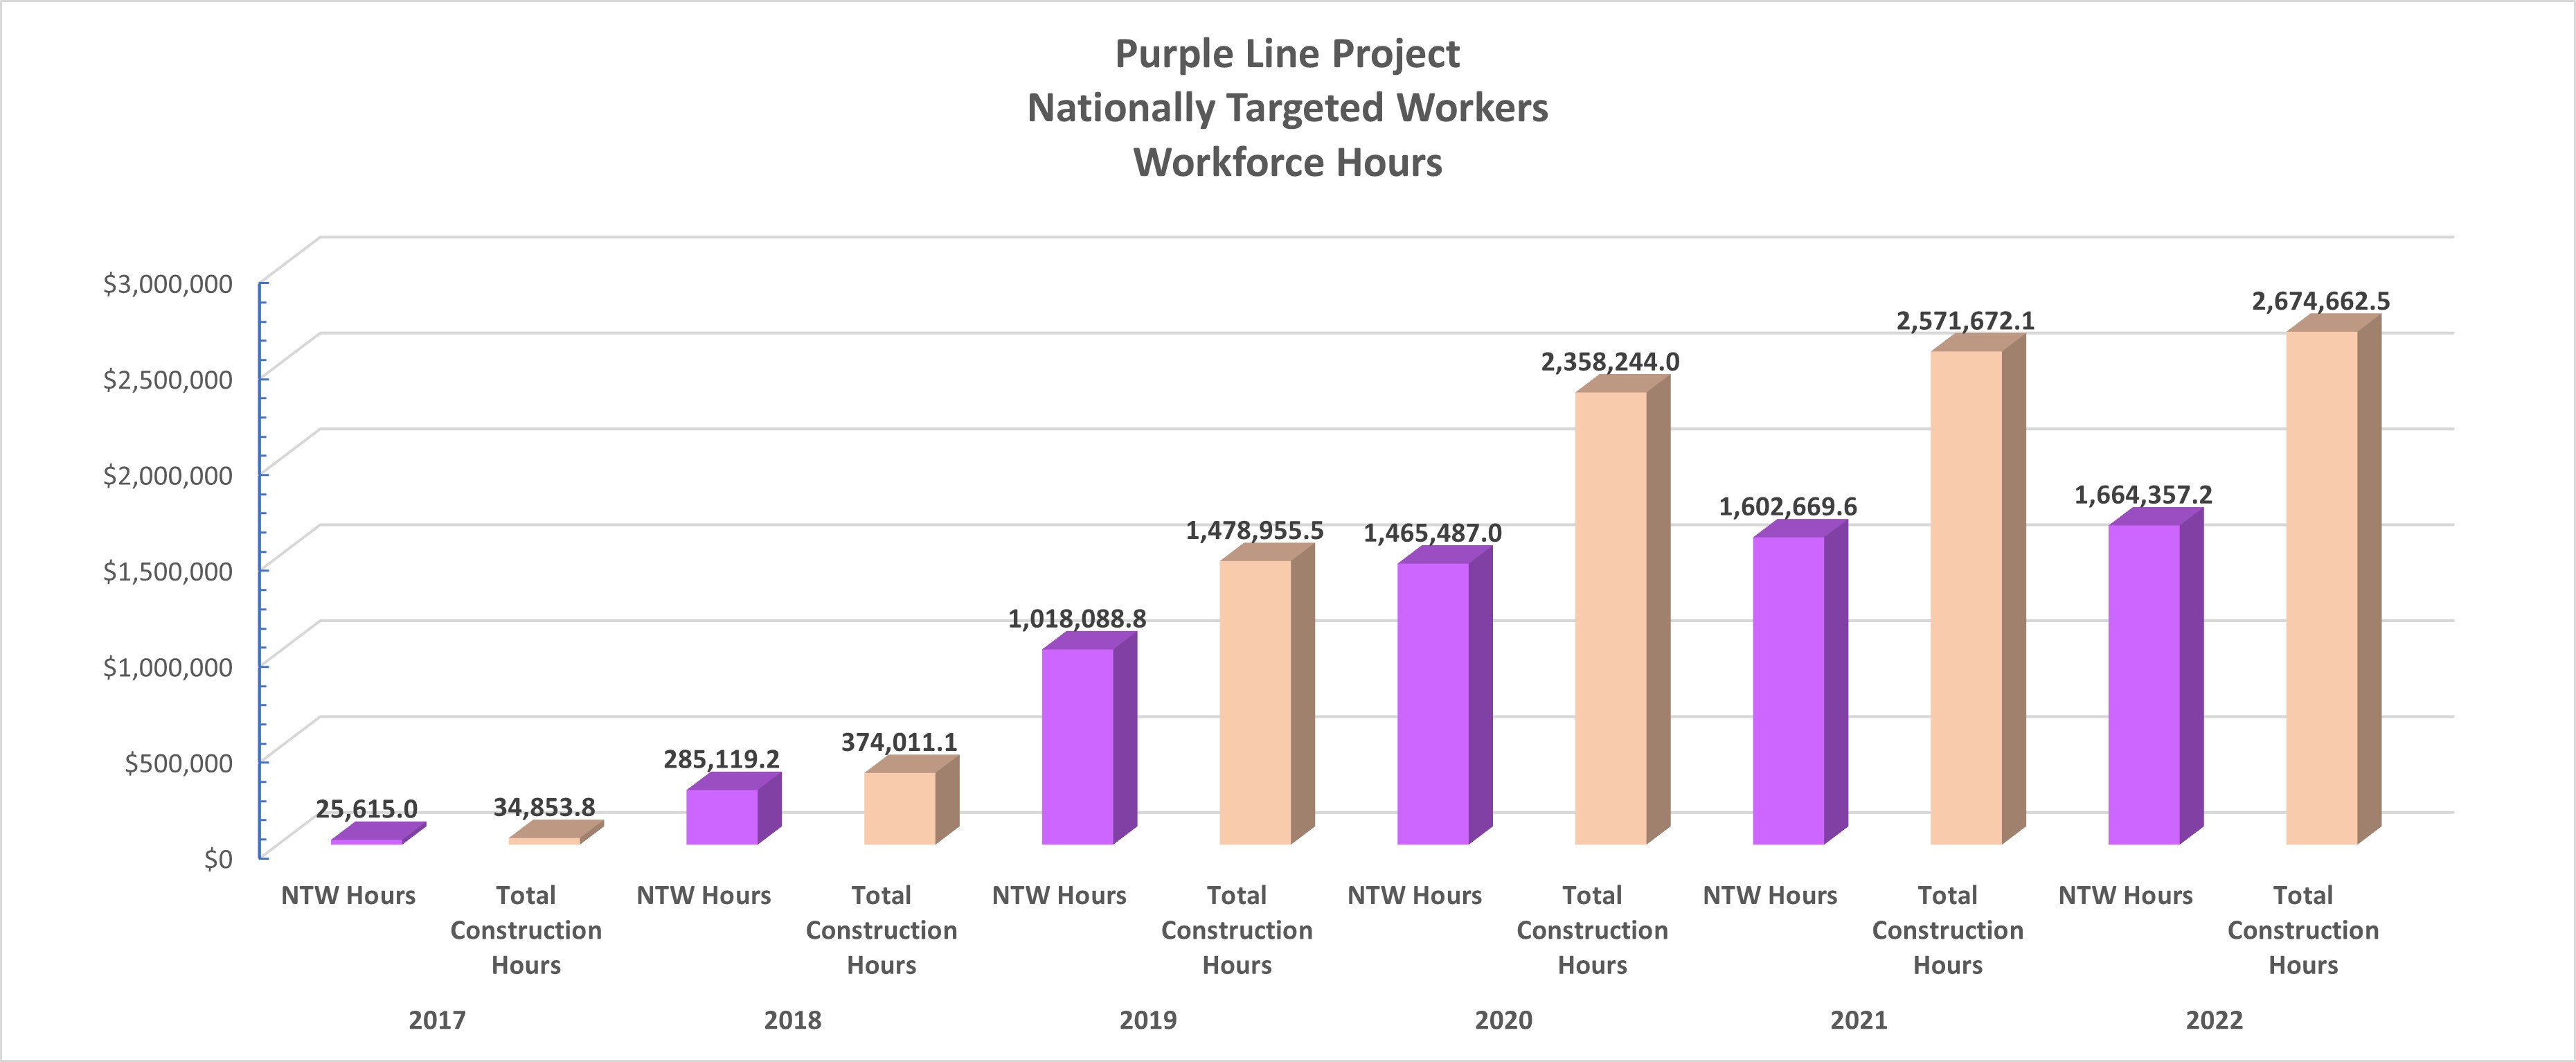 Purple Line Project Nationally Targeted Workers Workforce Hours